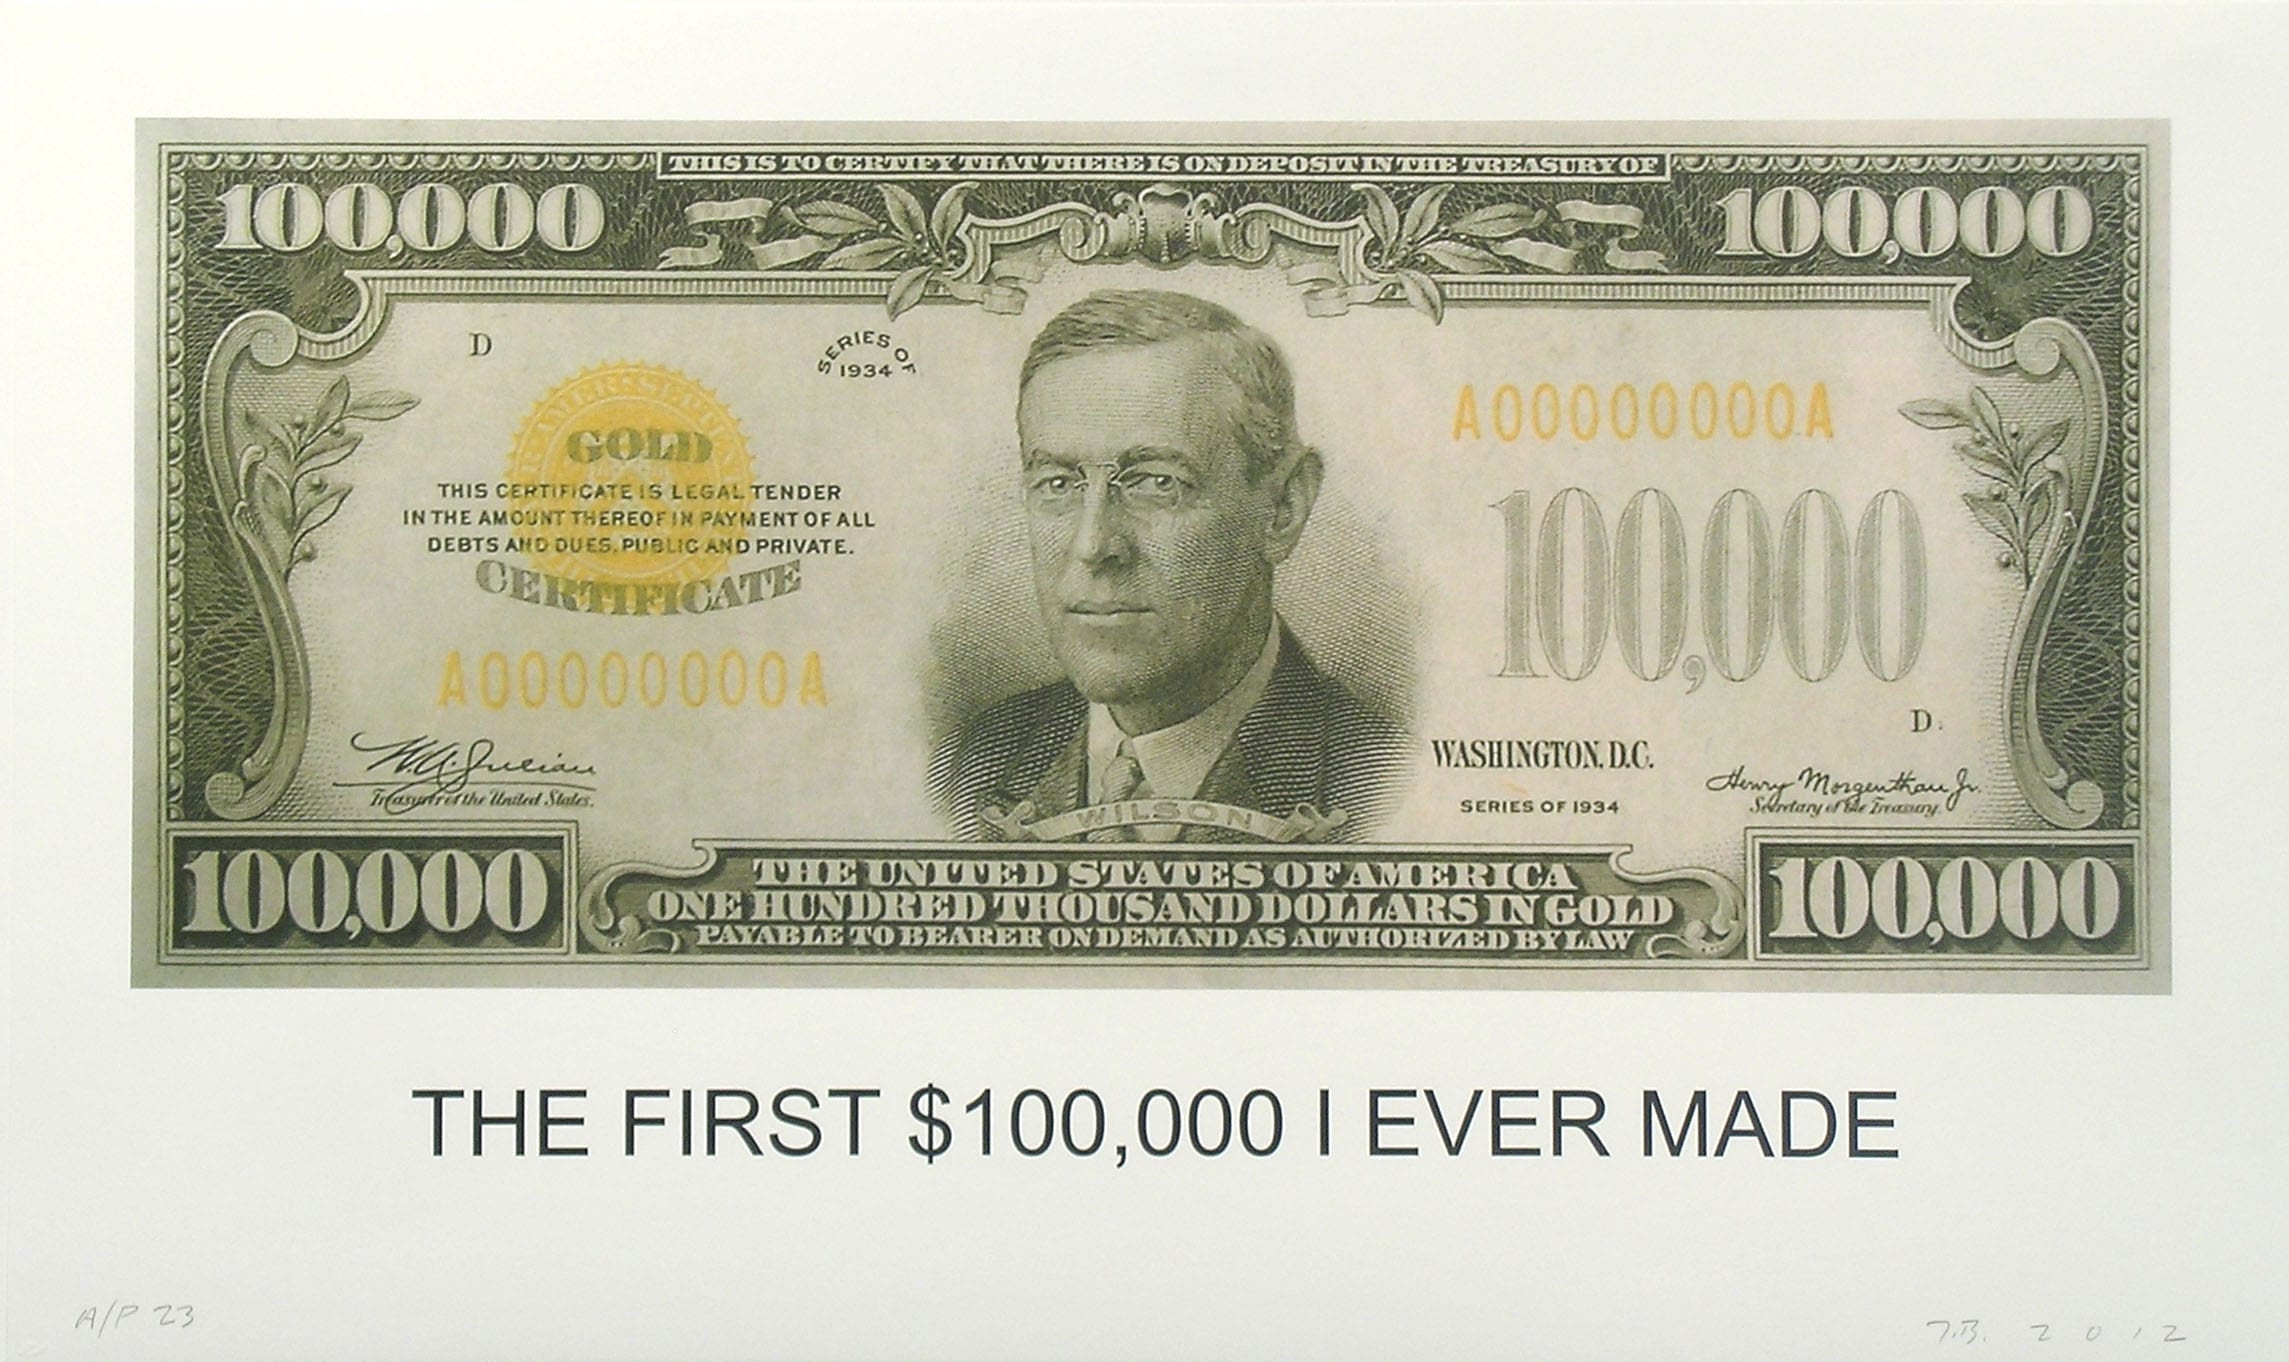 John Baldessari, The First $100,000 I Ever Made, 2012, edition of 100, published by Cirrus Editions